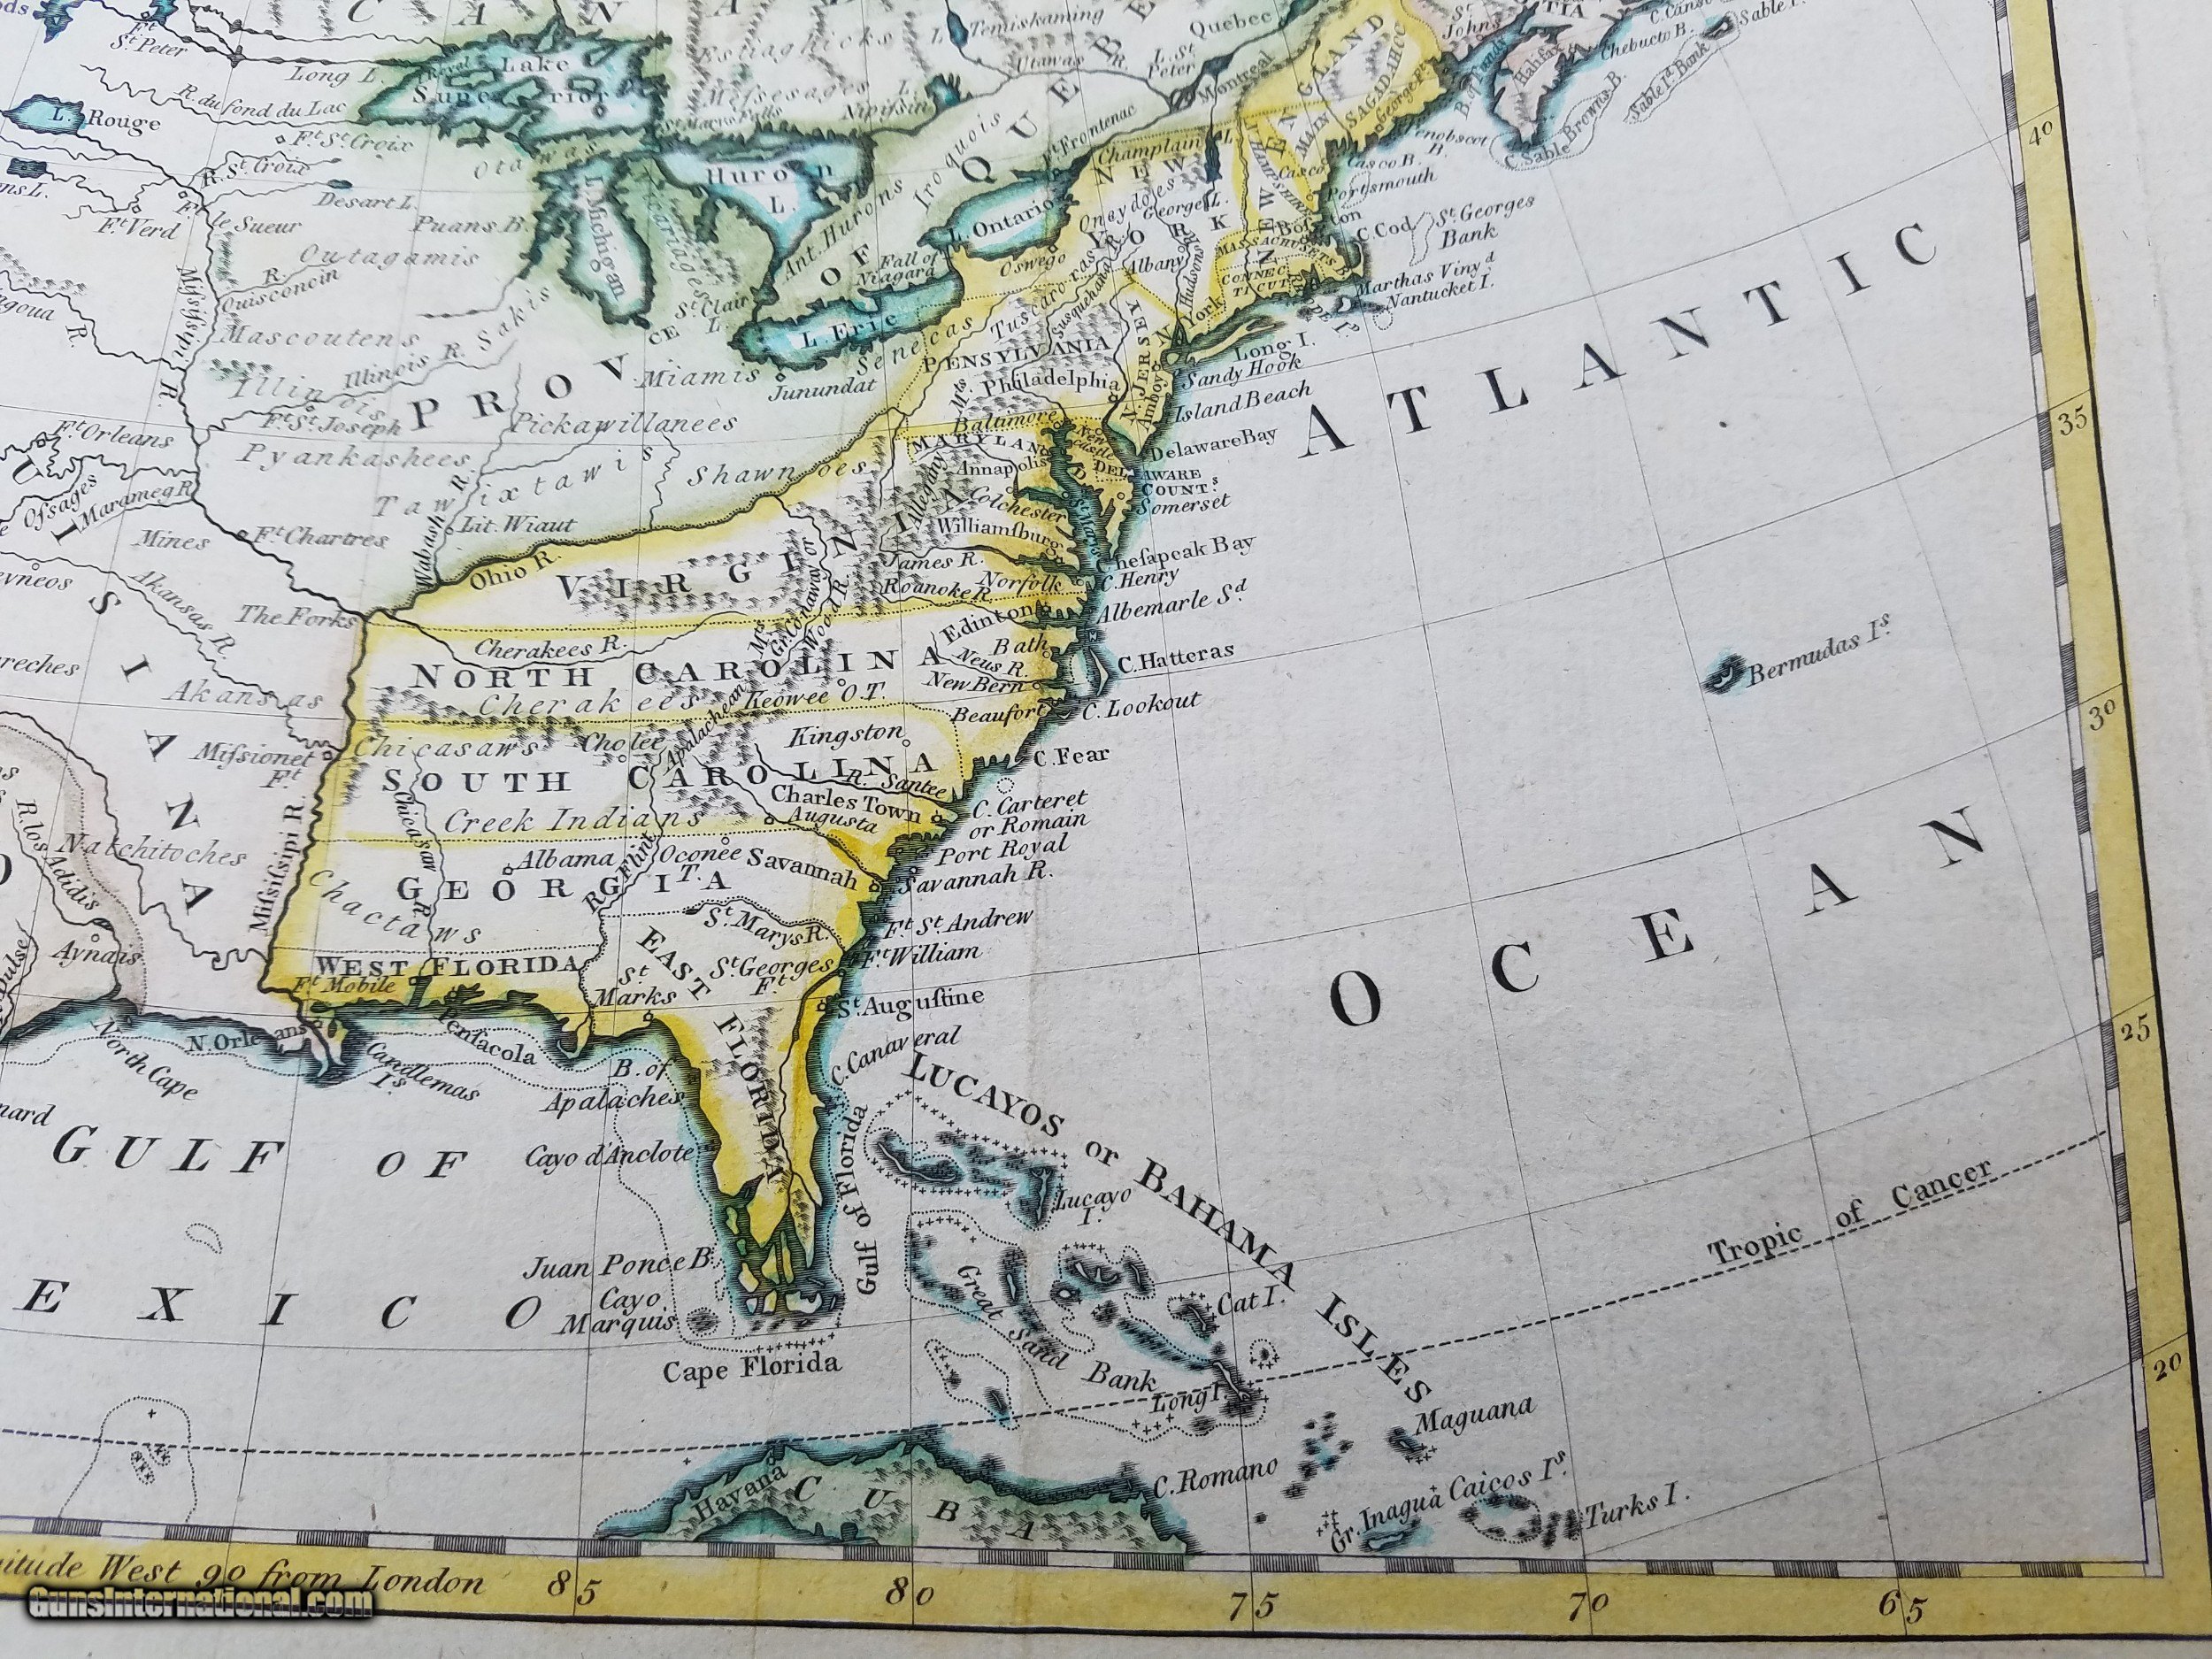 North American Map Circa 1775 By Thos Conder 101091811 69275 A688364A8588D069 